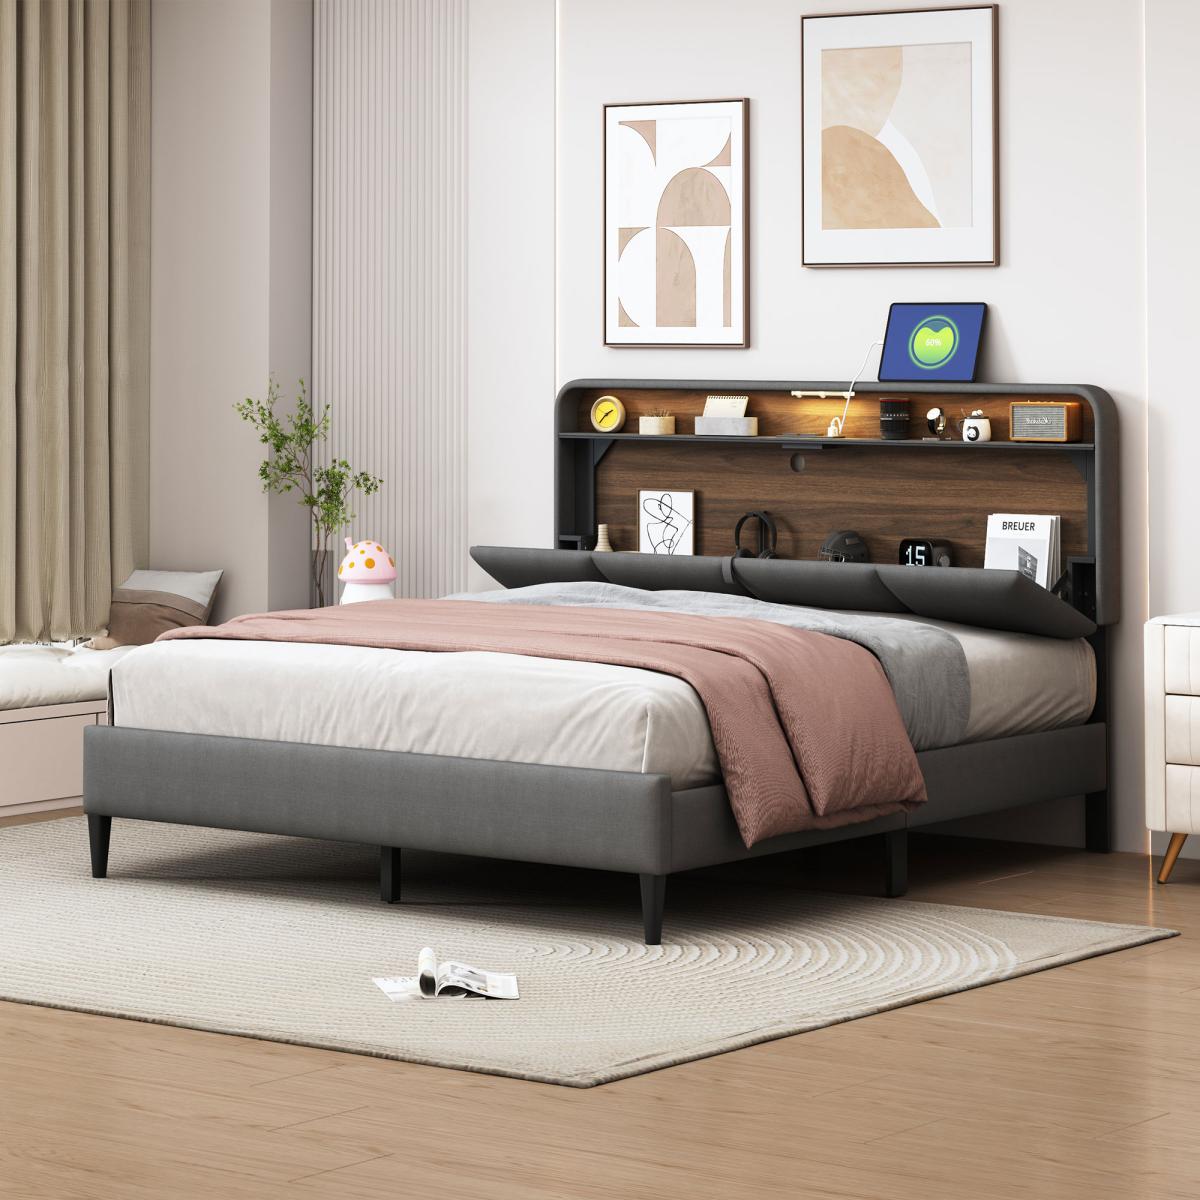 Queen size Upholstered Platform Bed with Storage Headboard, Sensor Light and a set of Sockets and Usb Ports, Linen Fabric, Gray